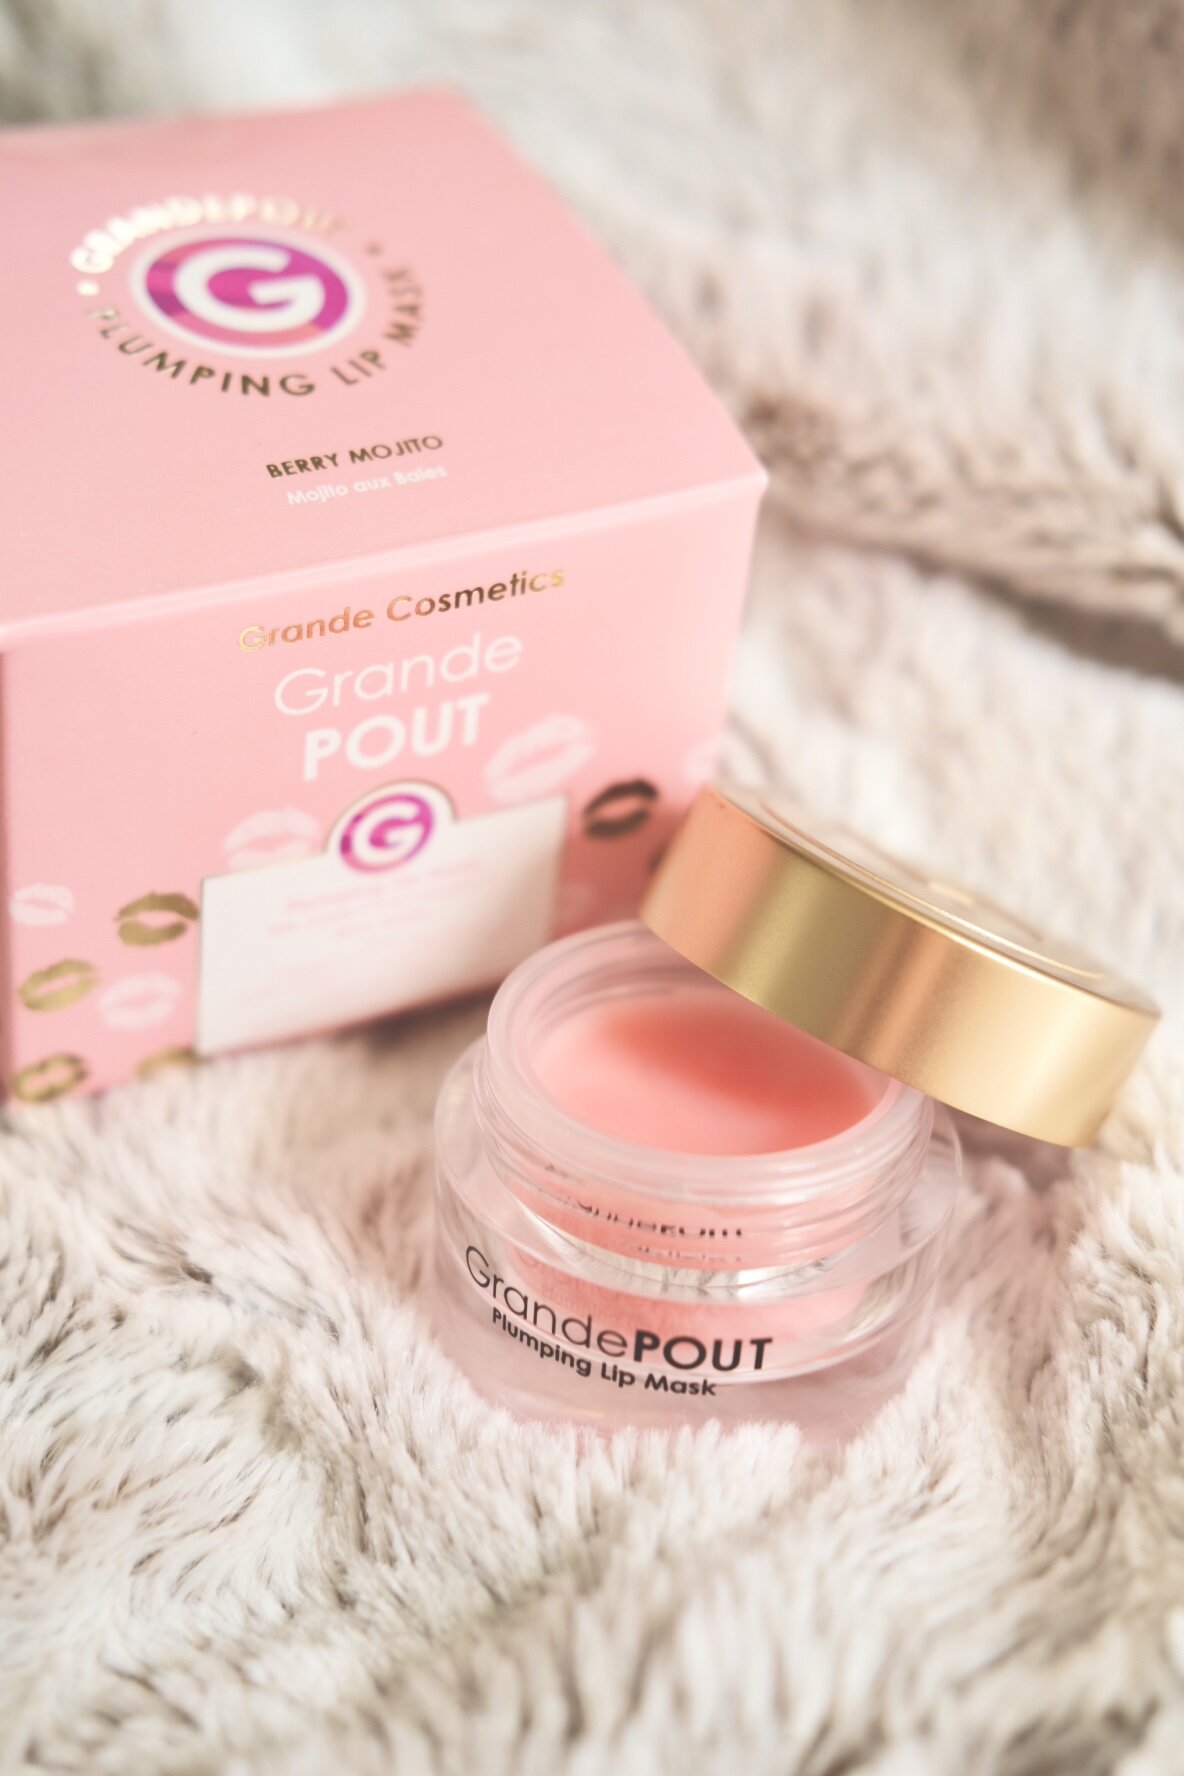 GrandePOUT review - a new Grande Cosmetics plumping, hydrating lip mask